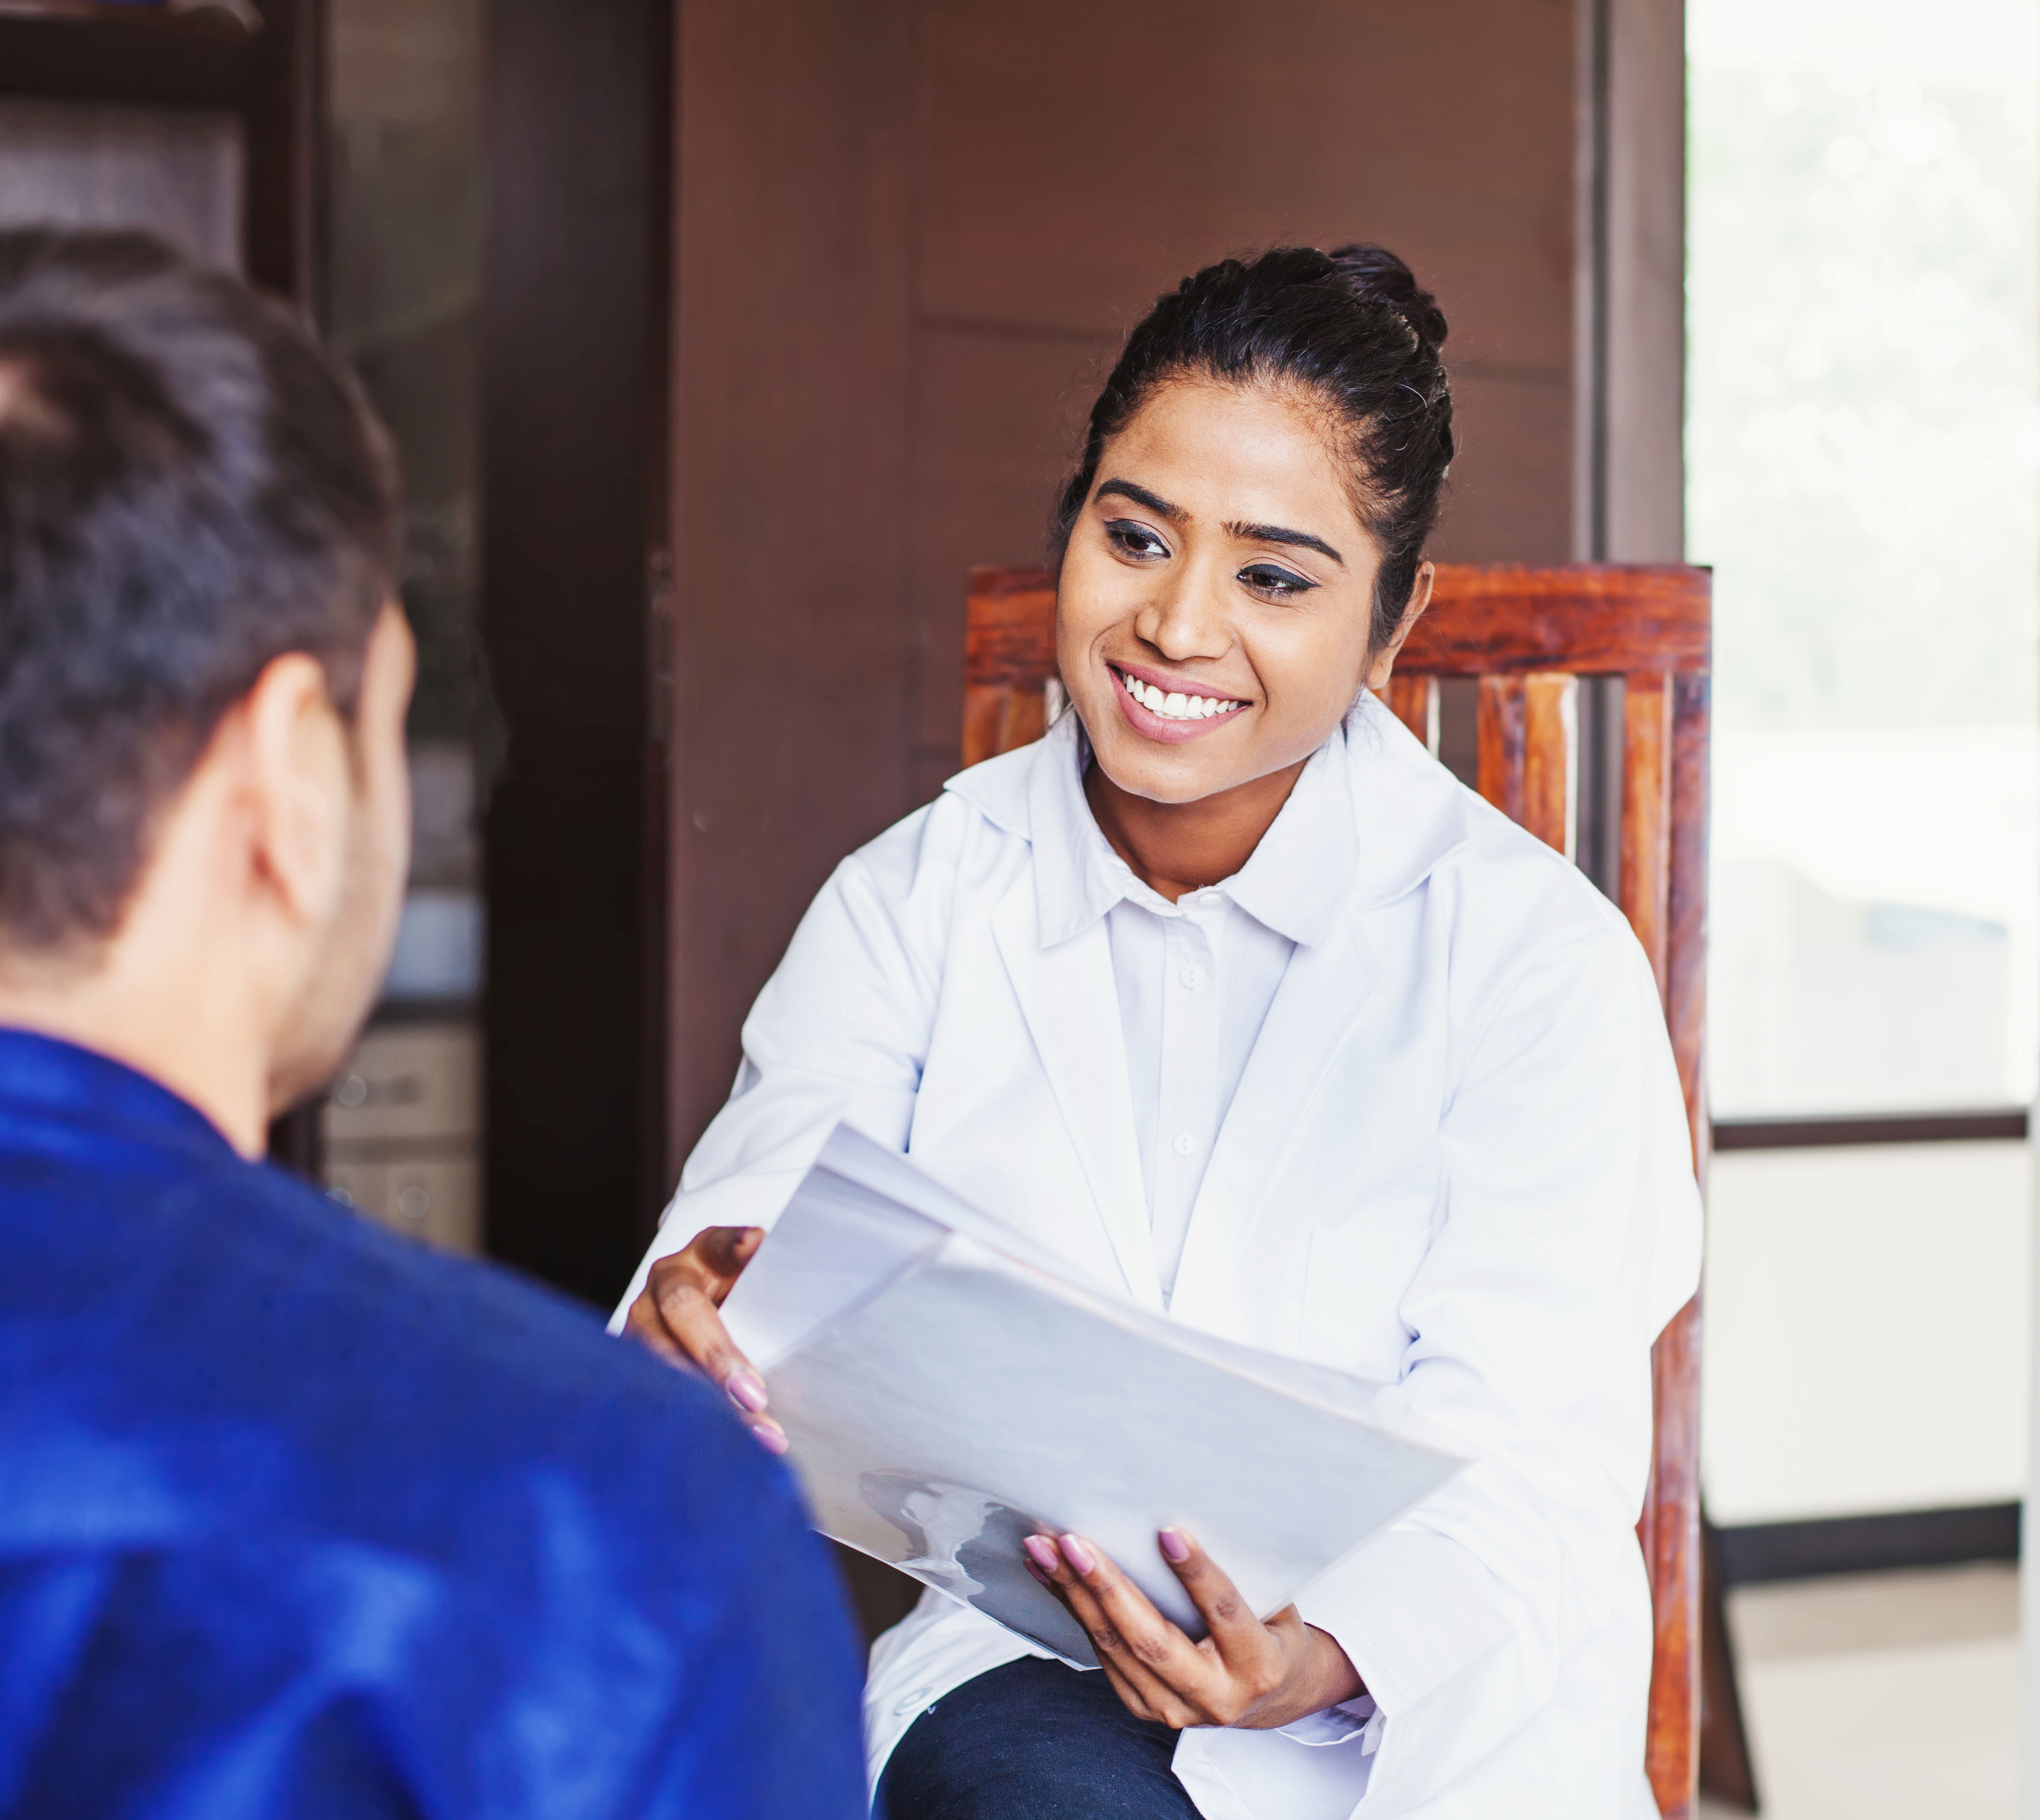 A dietitian in a white coat smiling at a client